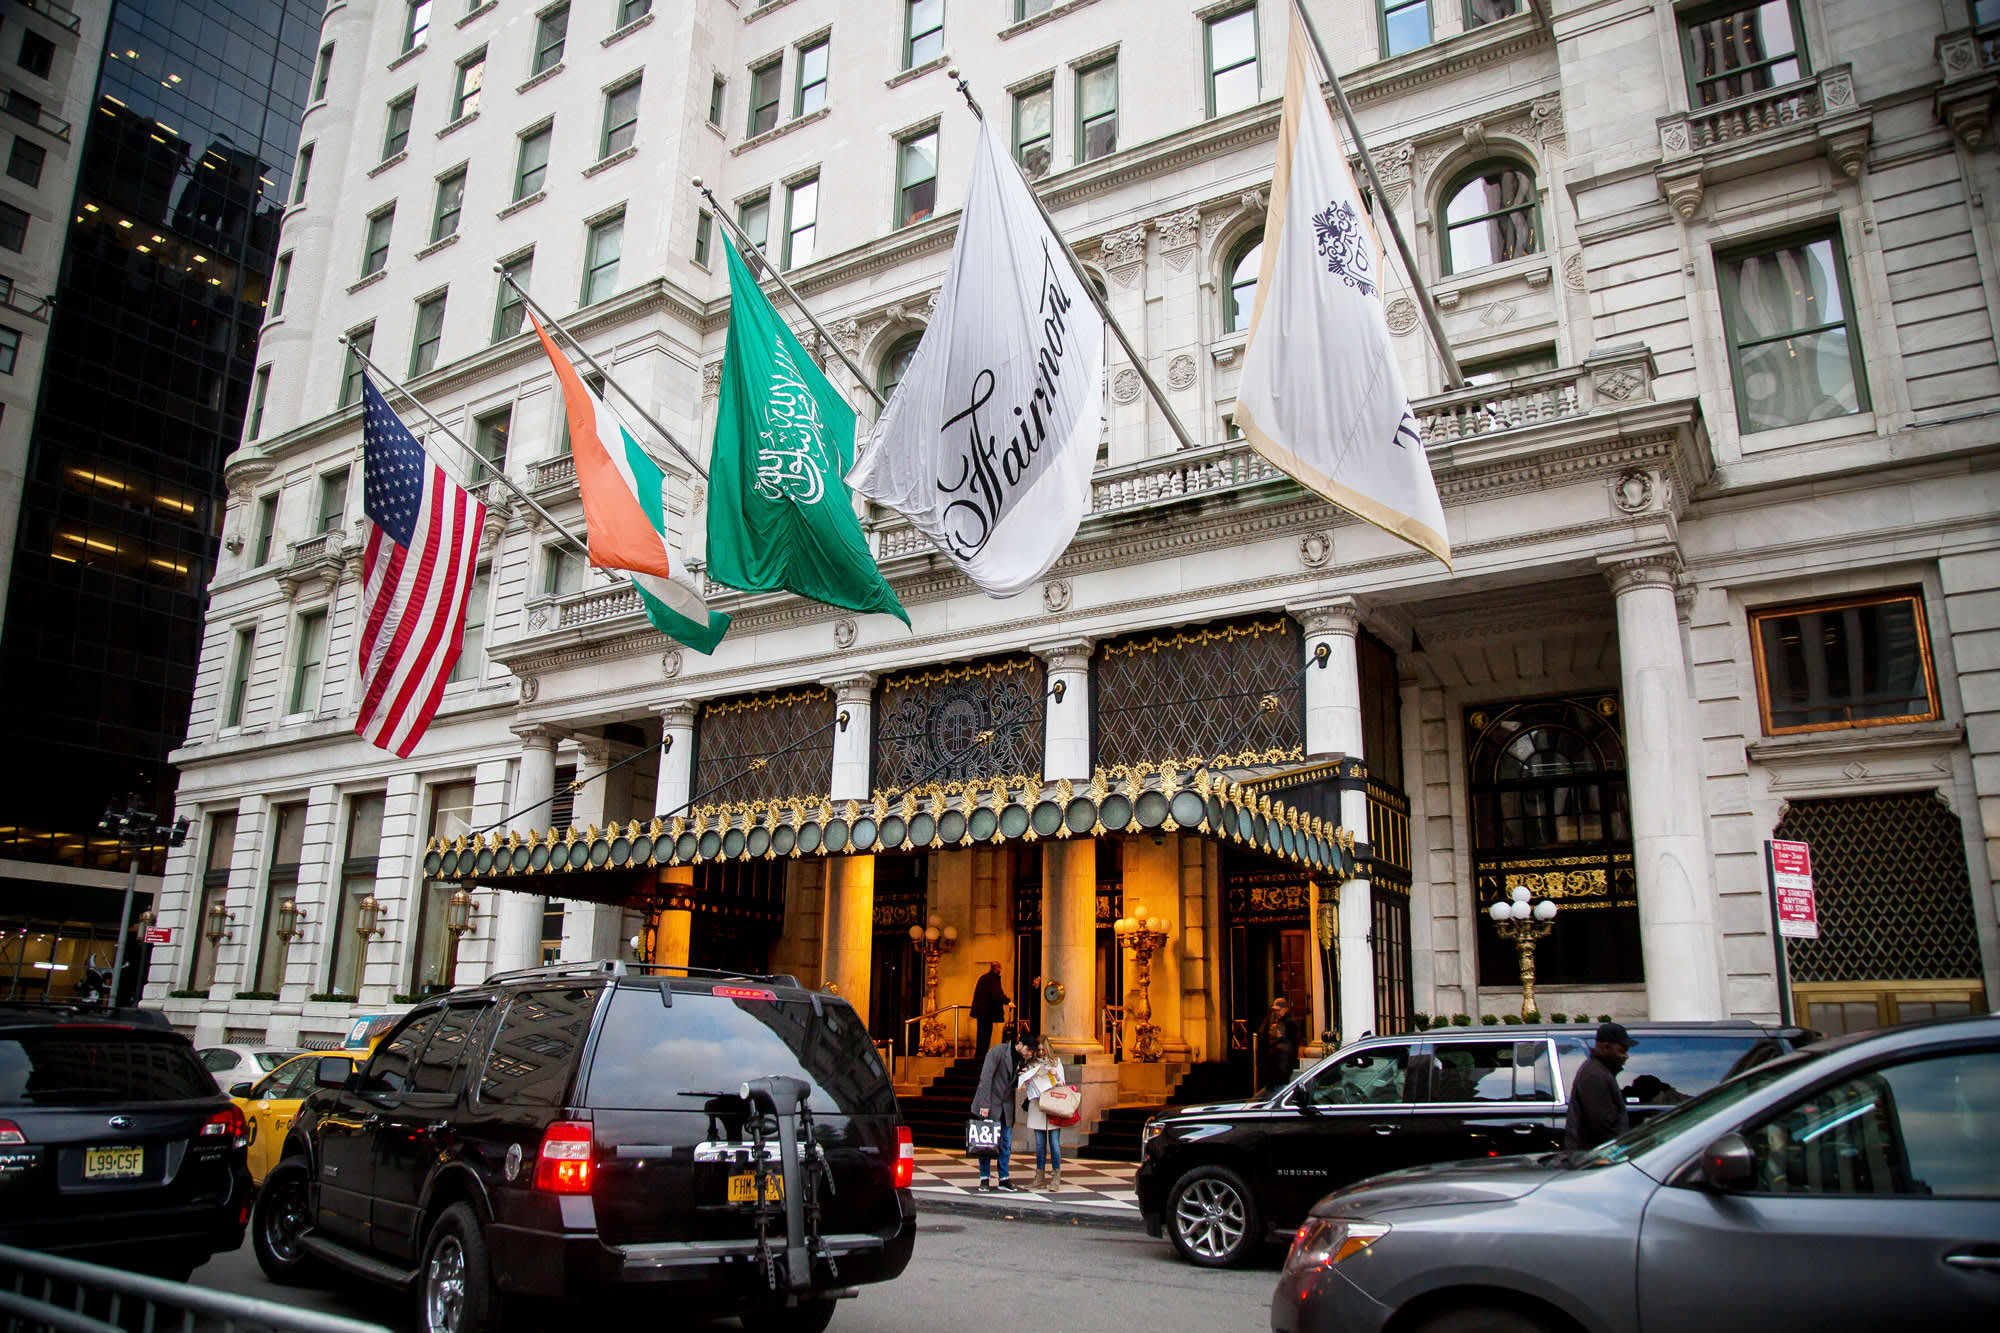 Deal is reached to sell the Plaza Hotel